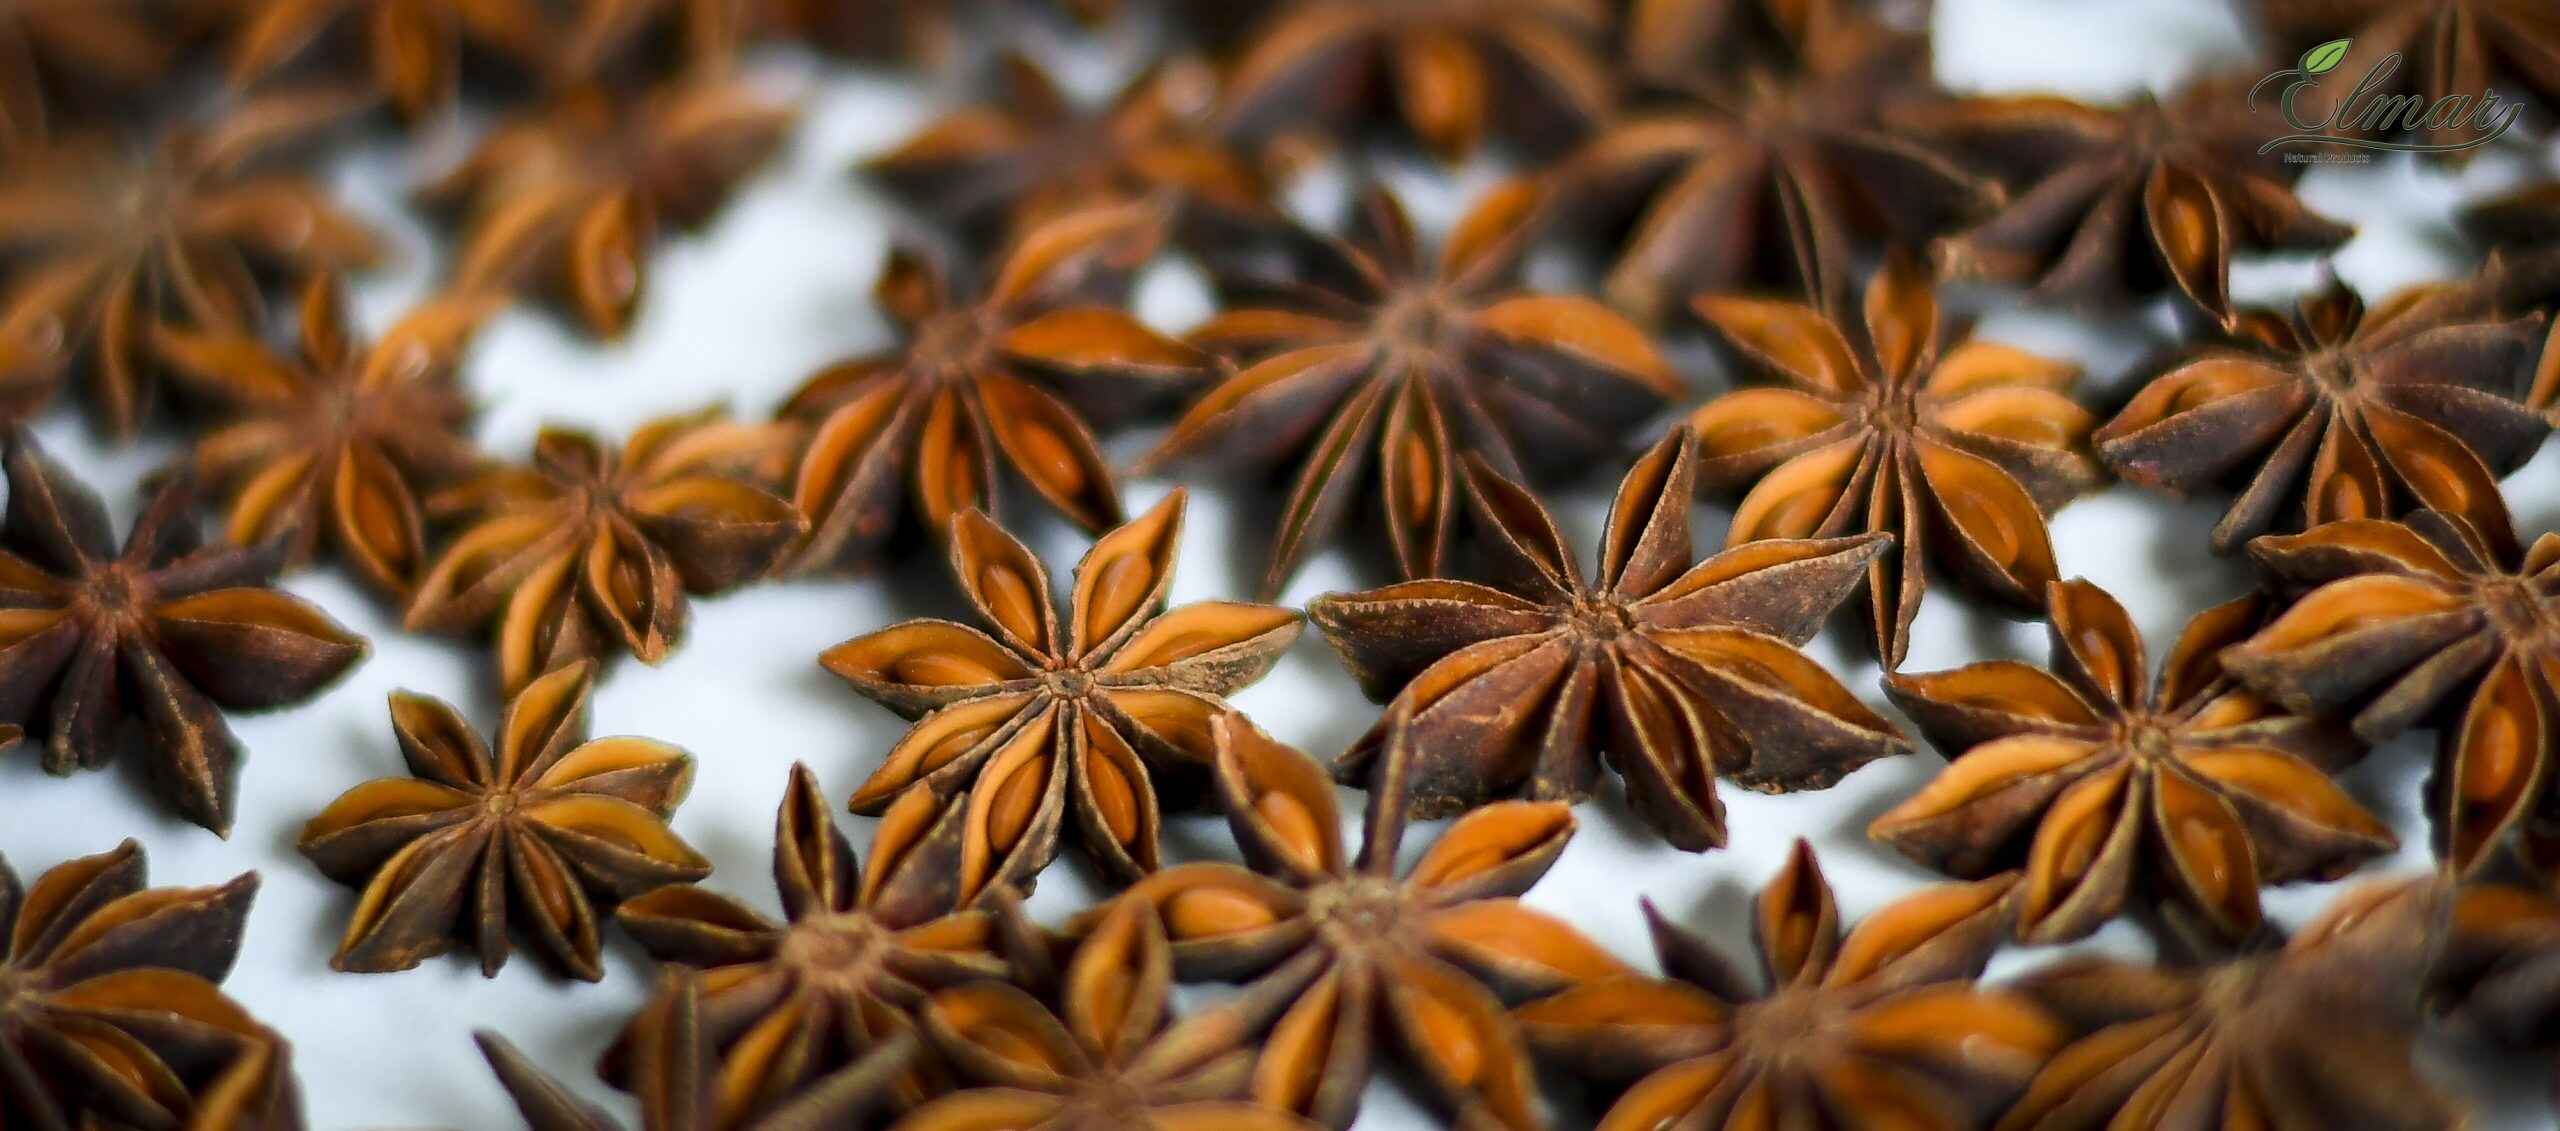 16-facts-about-star-anise